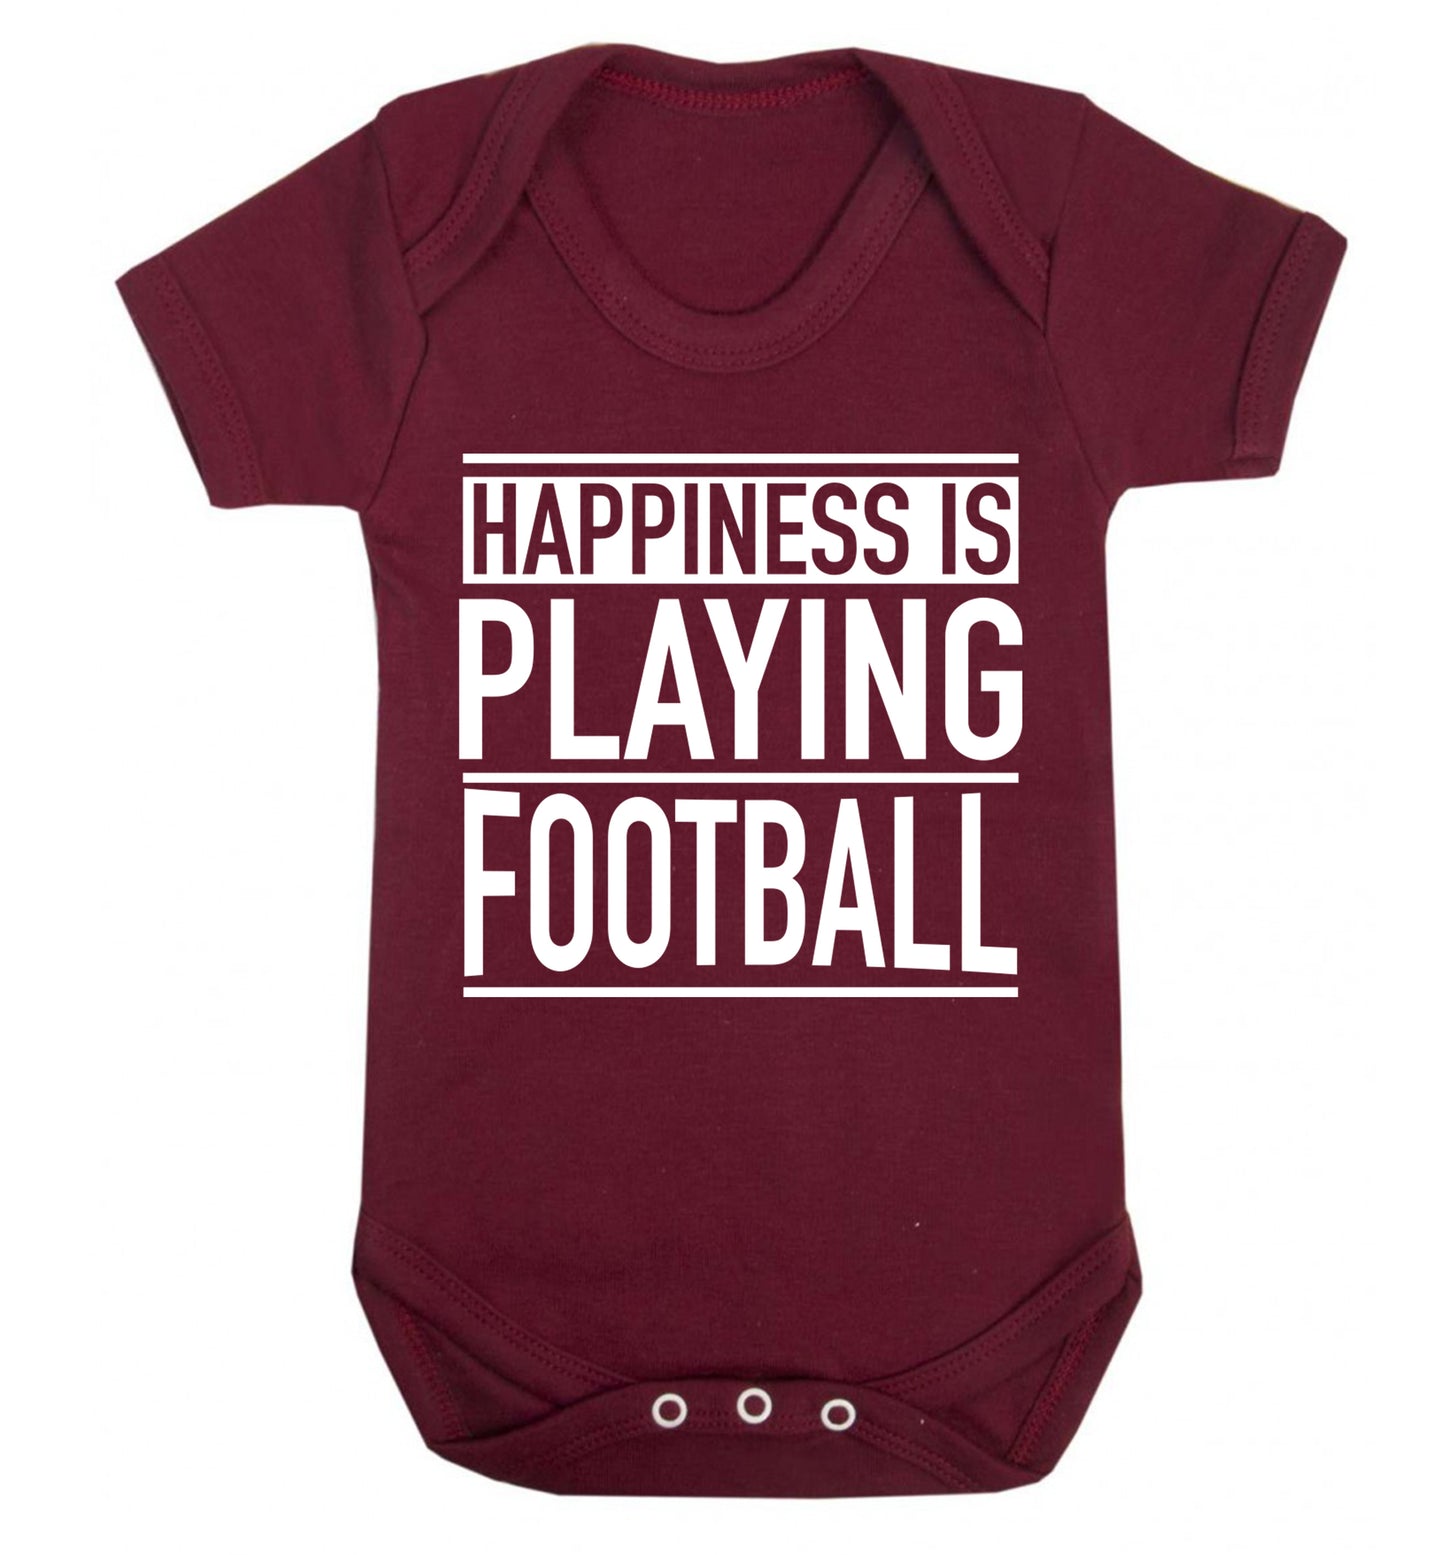 Happiness is playing football Baby Vest maroon 18-24 months